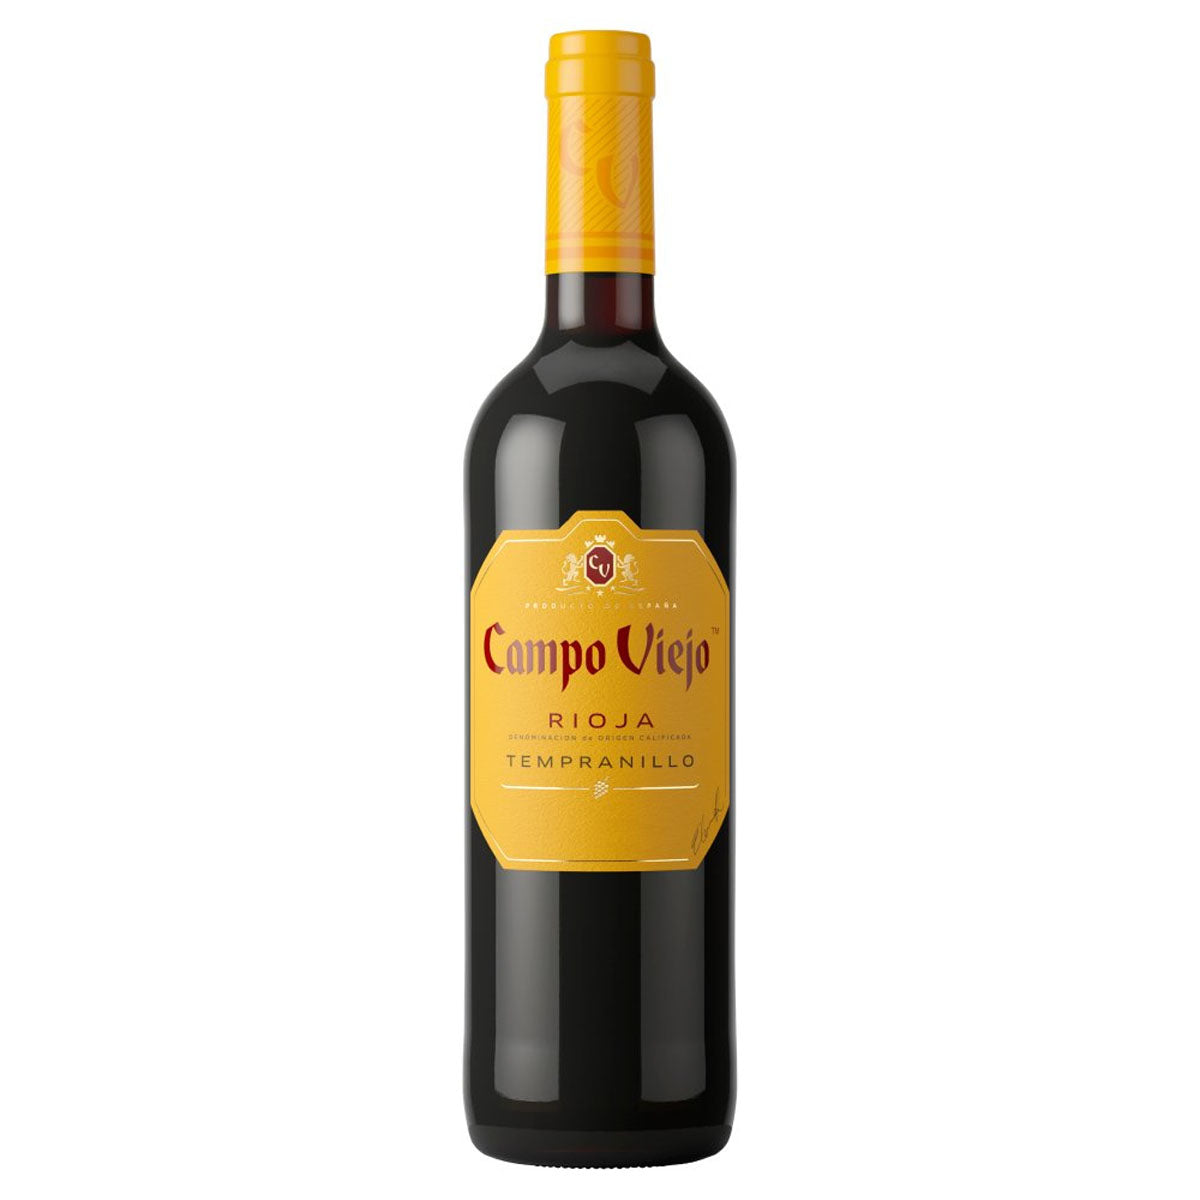 A bottle of Campo Viejo - Tempranillo (13.5% ABV) - 750ml with a yellow label.